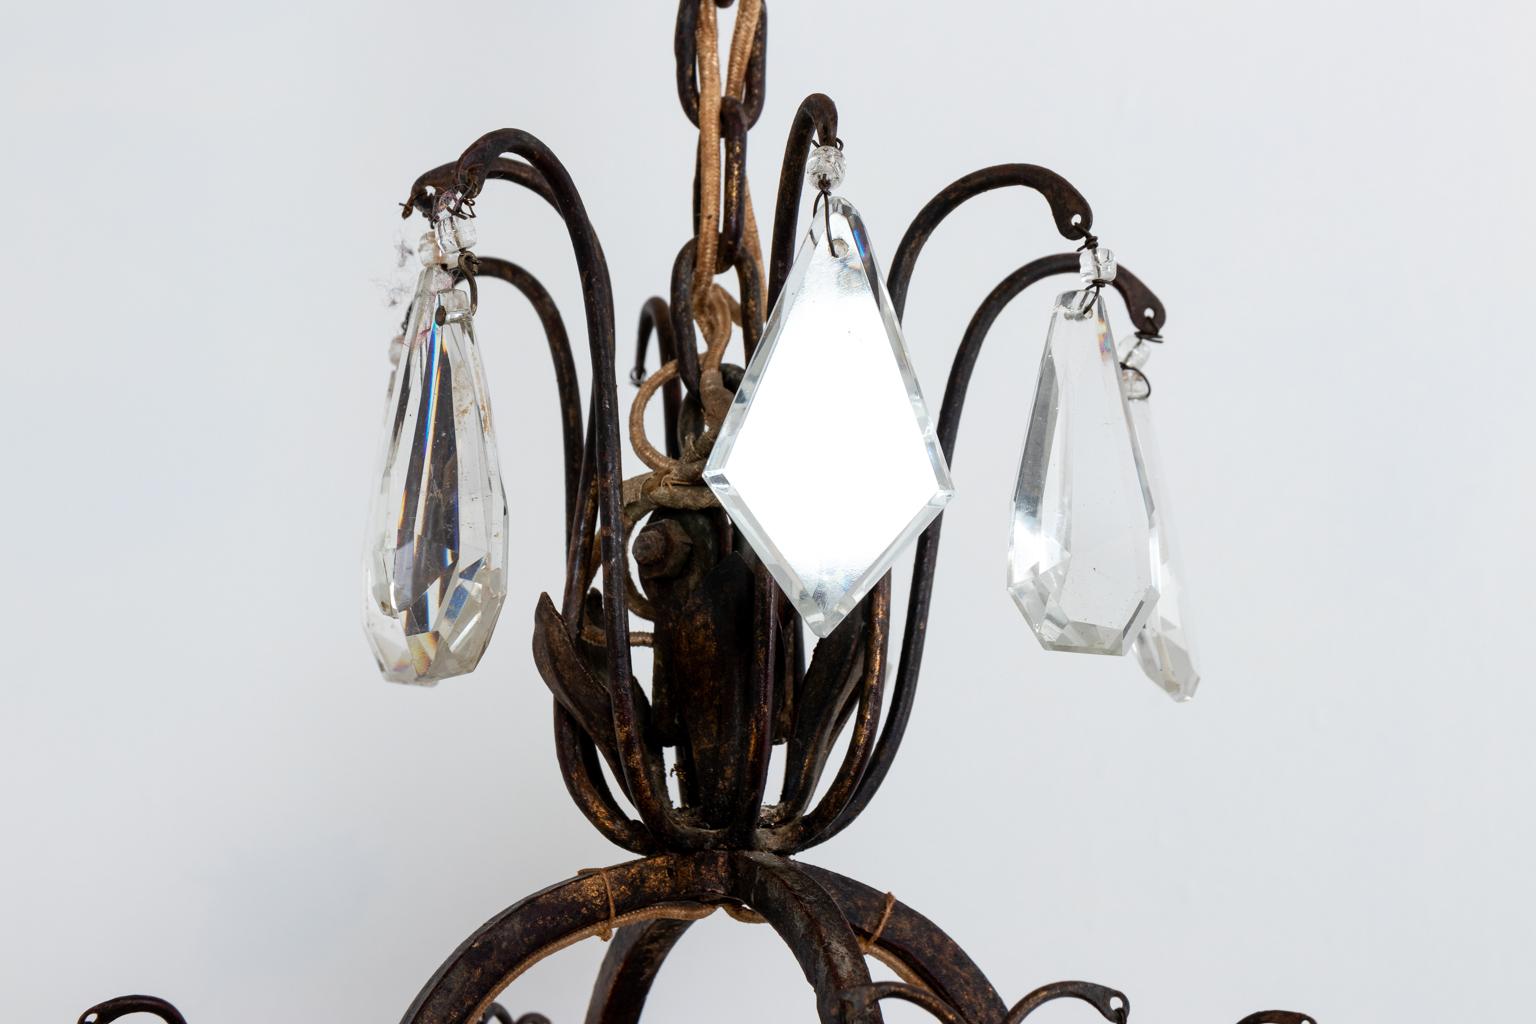 French chandelier made of wrought iron with a basket form filled with iron tracery, circa 1920s. The electrified arms are supported from the center basket. The fixture hangs from wrought iron supports. The basket and arms feature clear and amethyst